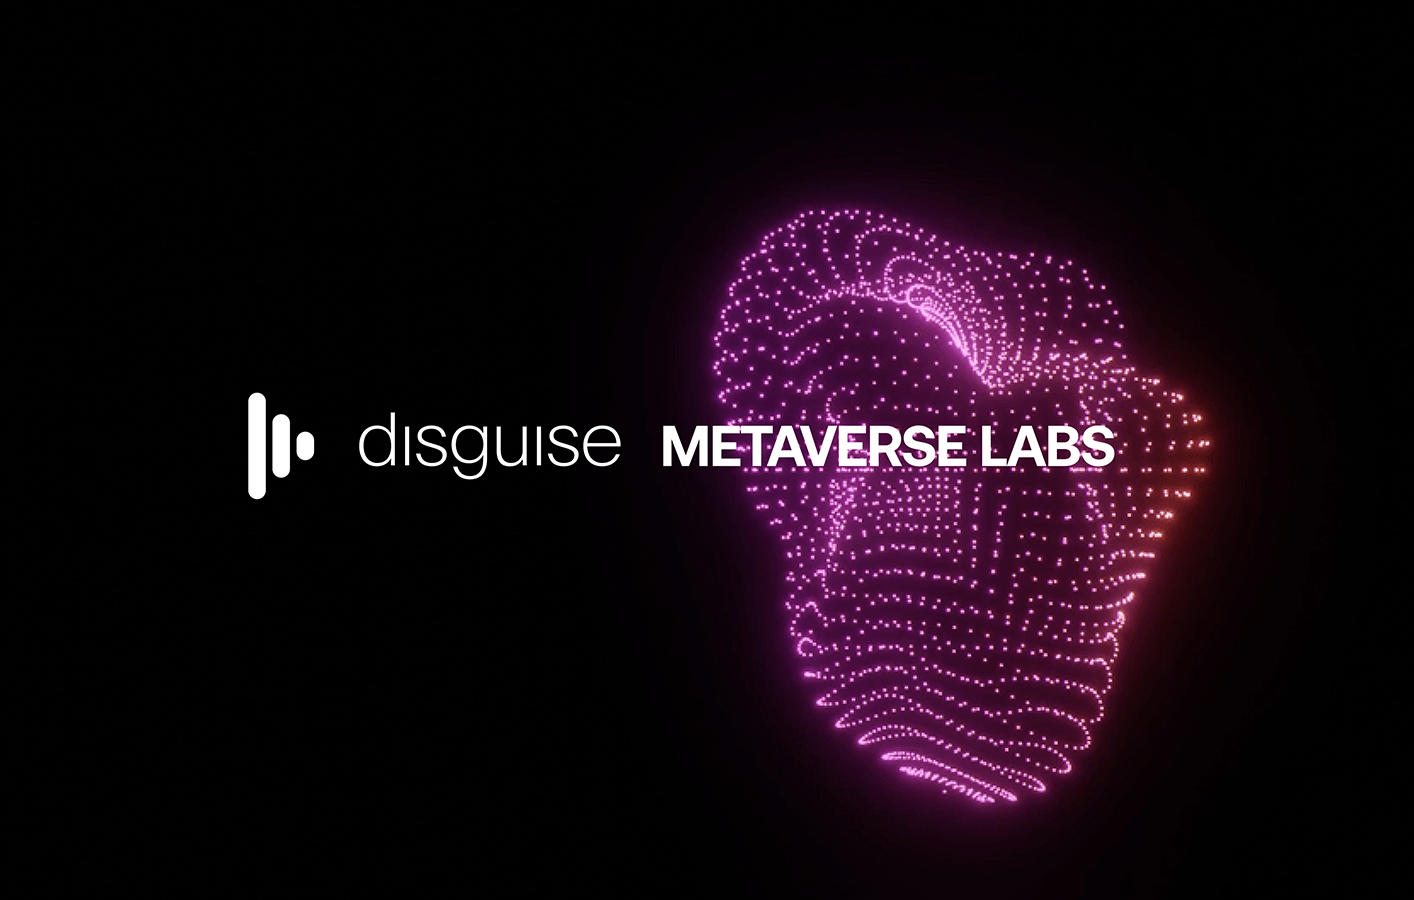 disguise launches Metaverse Labs for end-to-end metaverse experience enablement